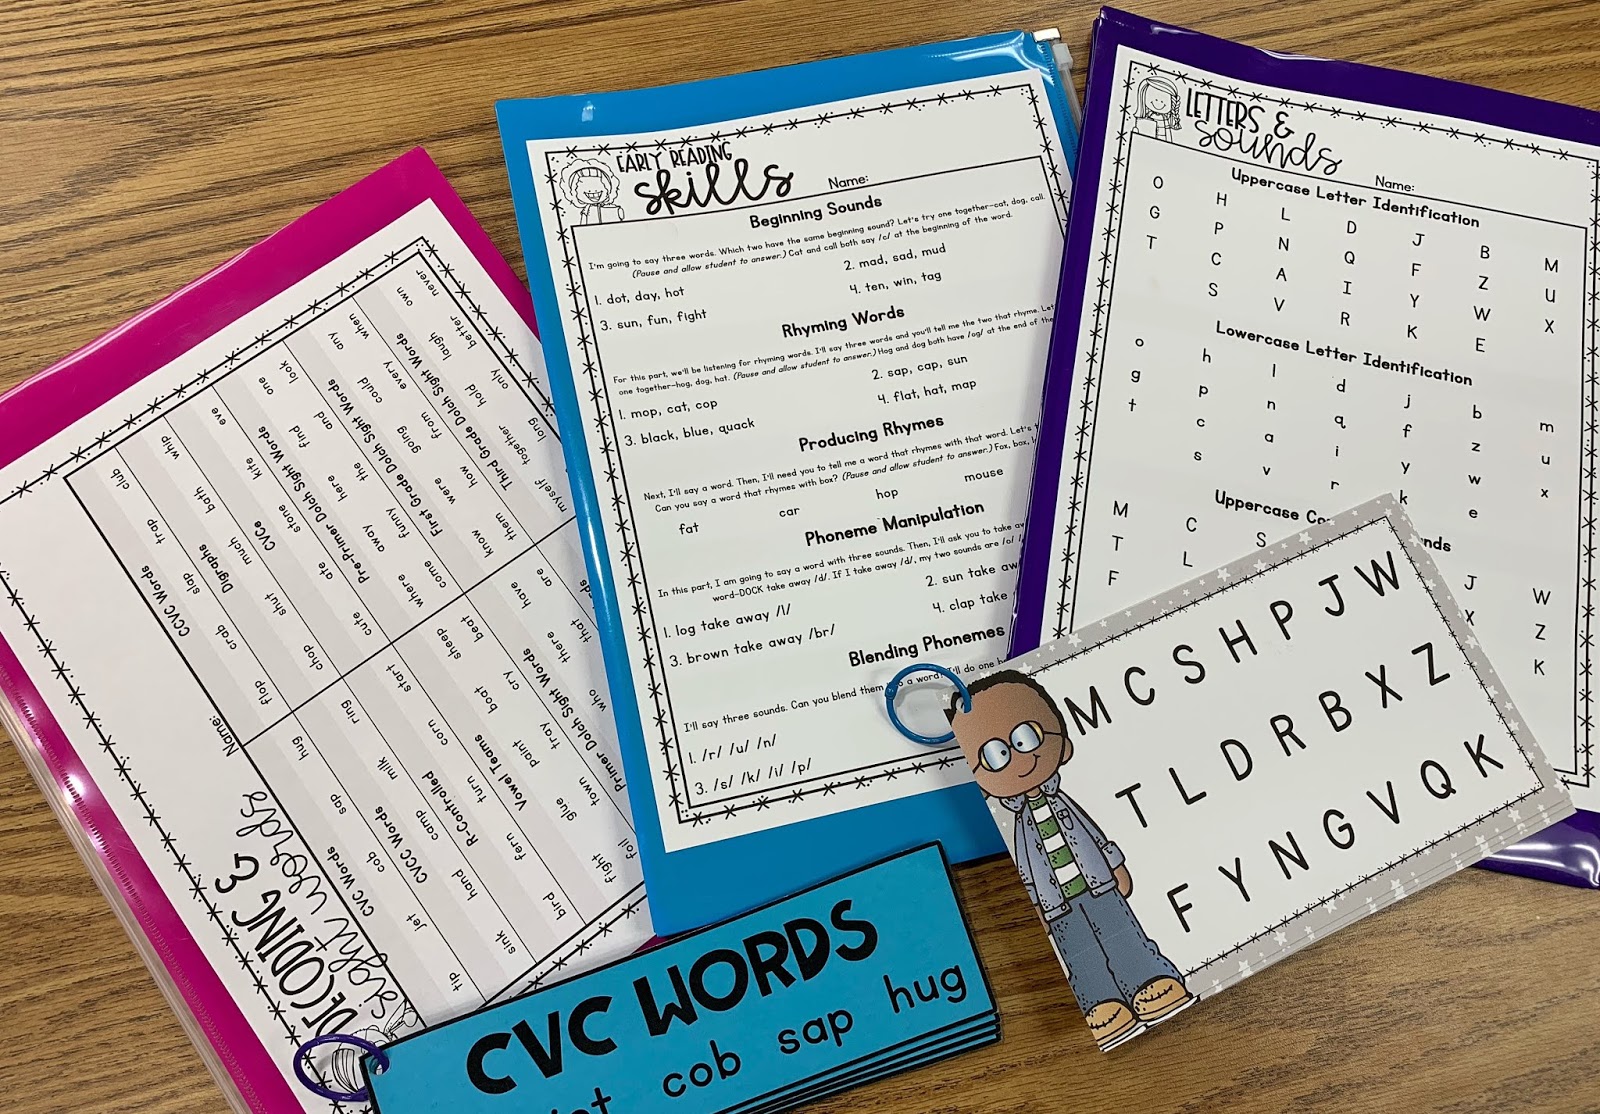 Assessments on table with text "Decoding and Sight Words" "Early Reading Skills" Letters and Sounds"